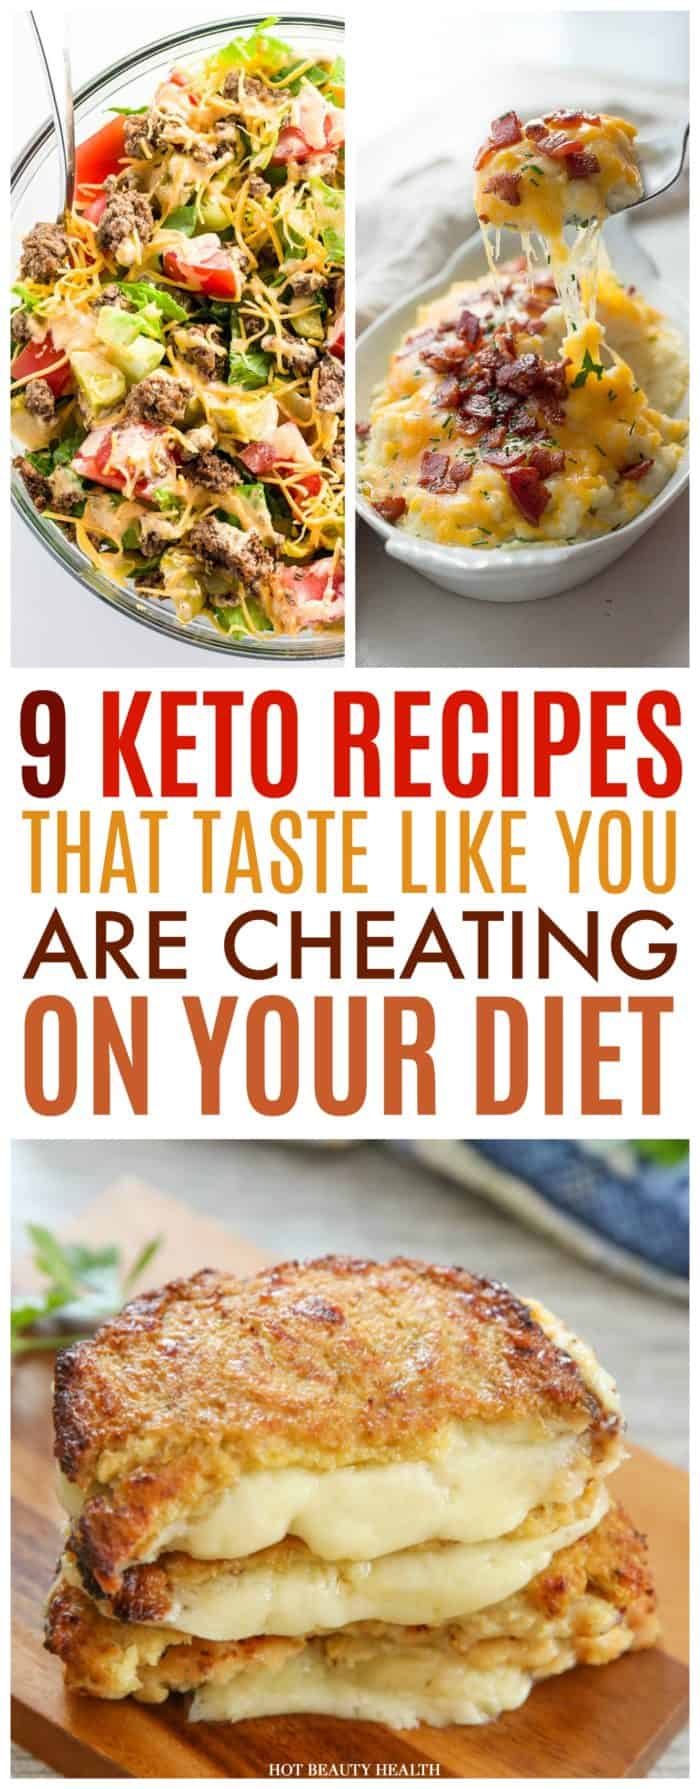 9 Ketogenic Recipes For Anyone On a Low Carb Diet - Hot Beauty Health